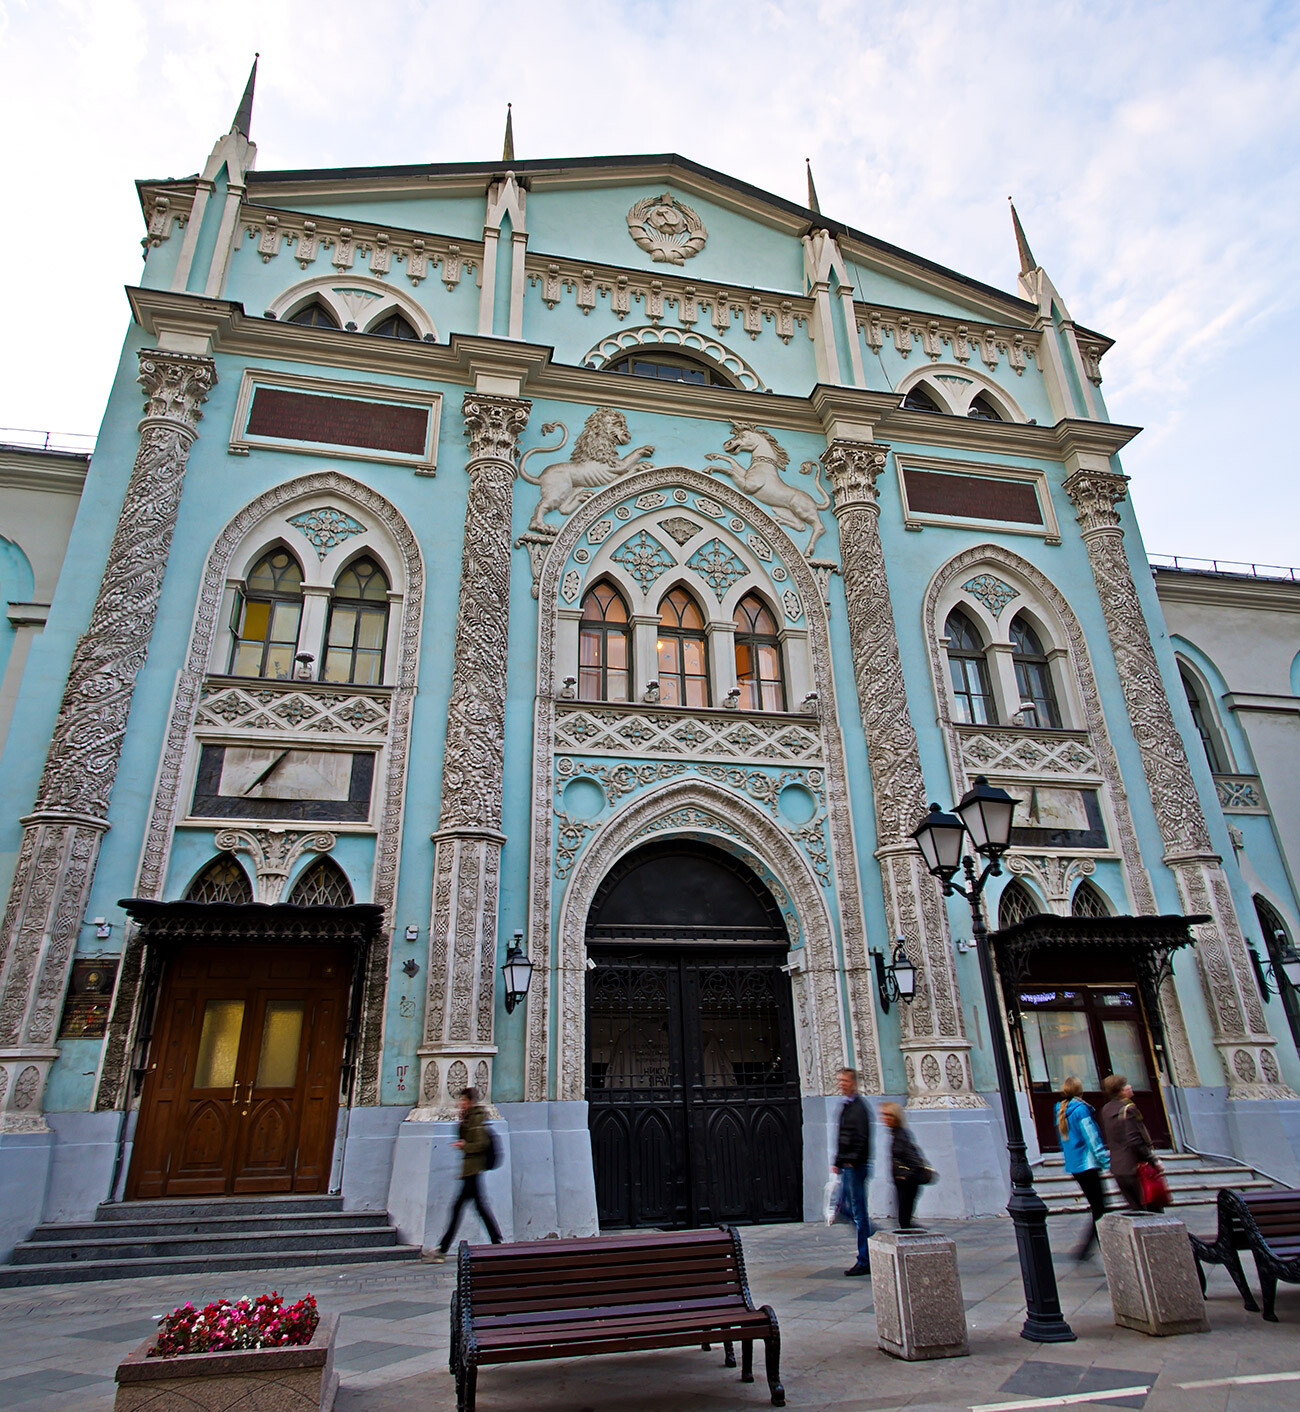 Moscow Printing House (now home to the History and Archives Institute)